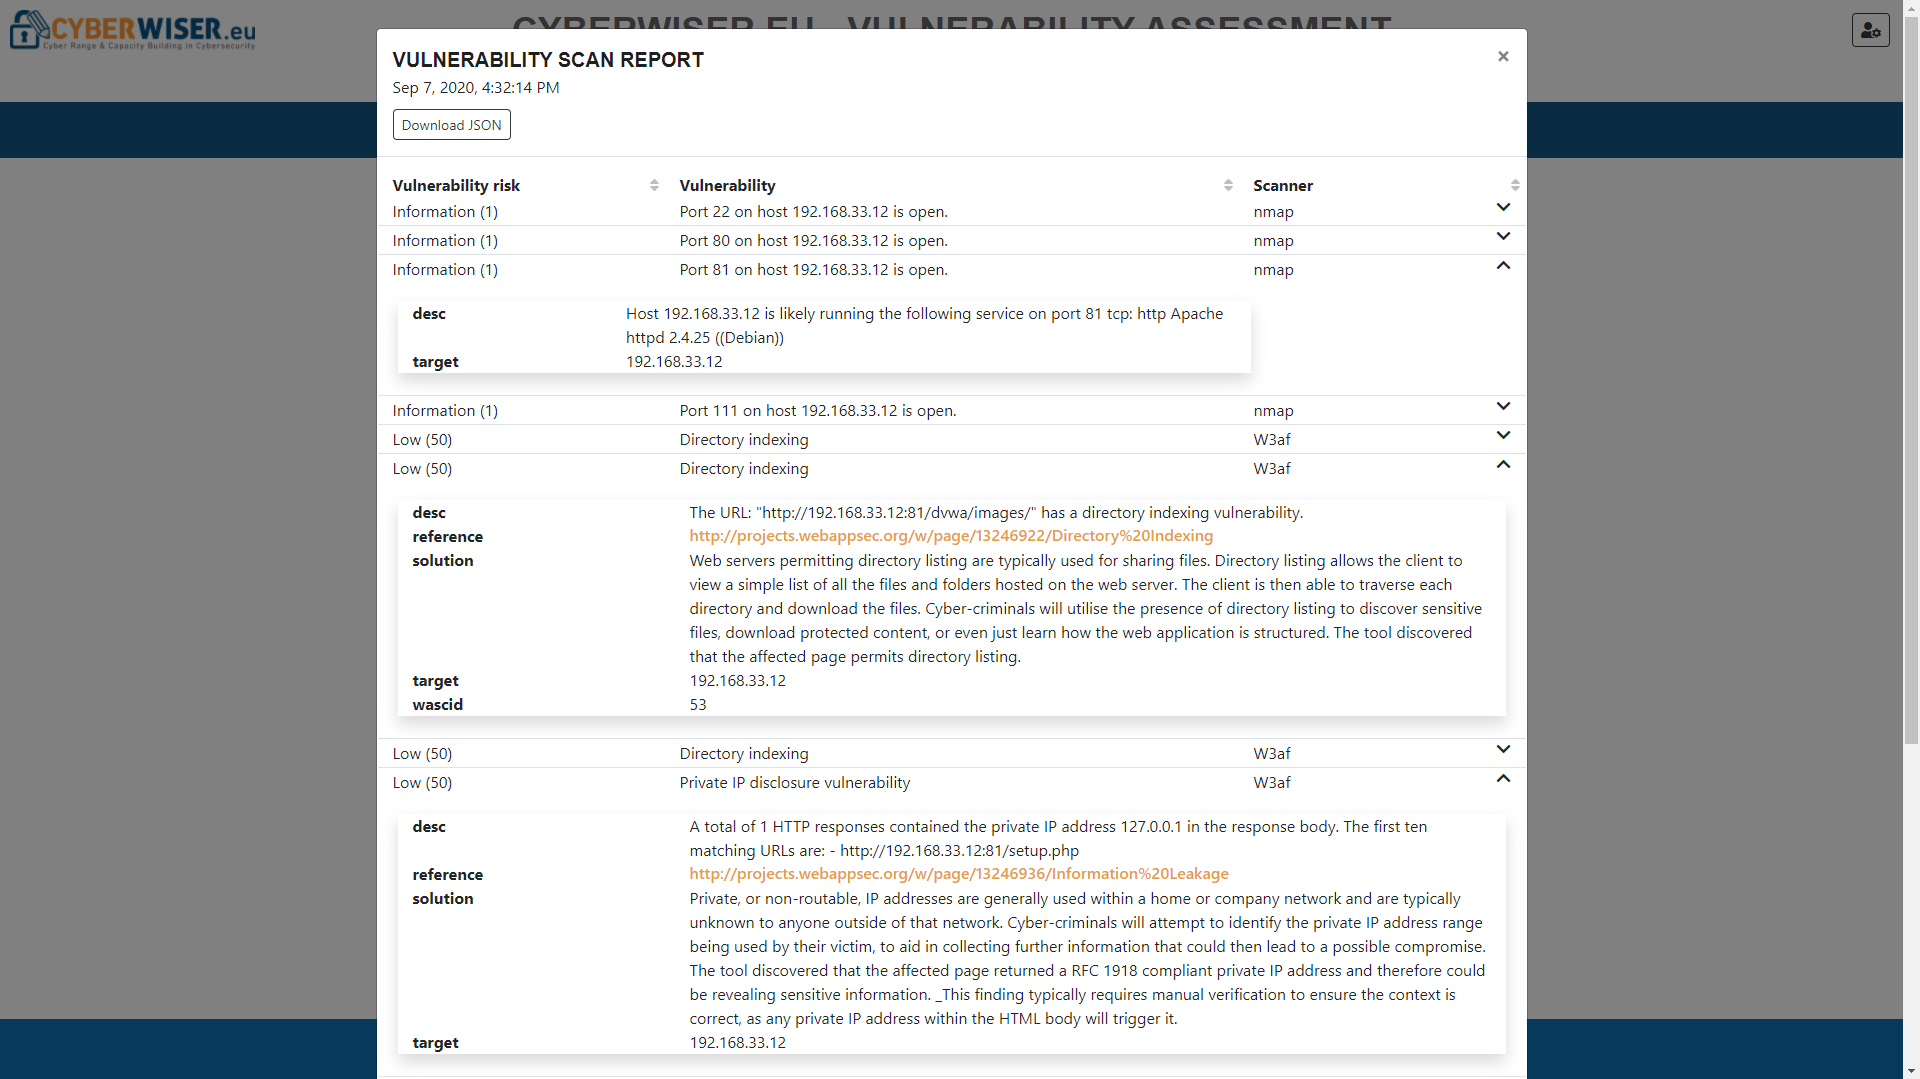 XLAB’s Vulnerability Assessment Tools showing a scan report with details of vulnerabilities detected.